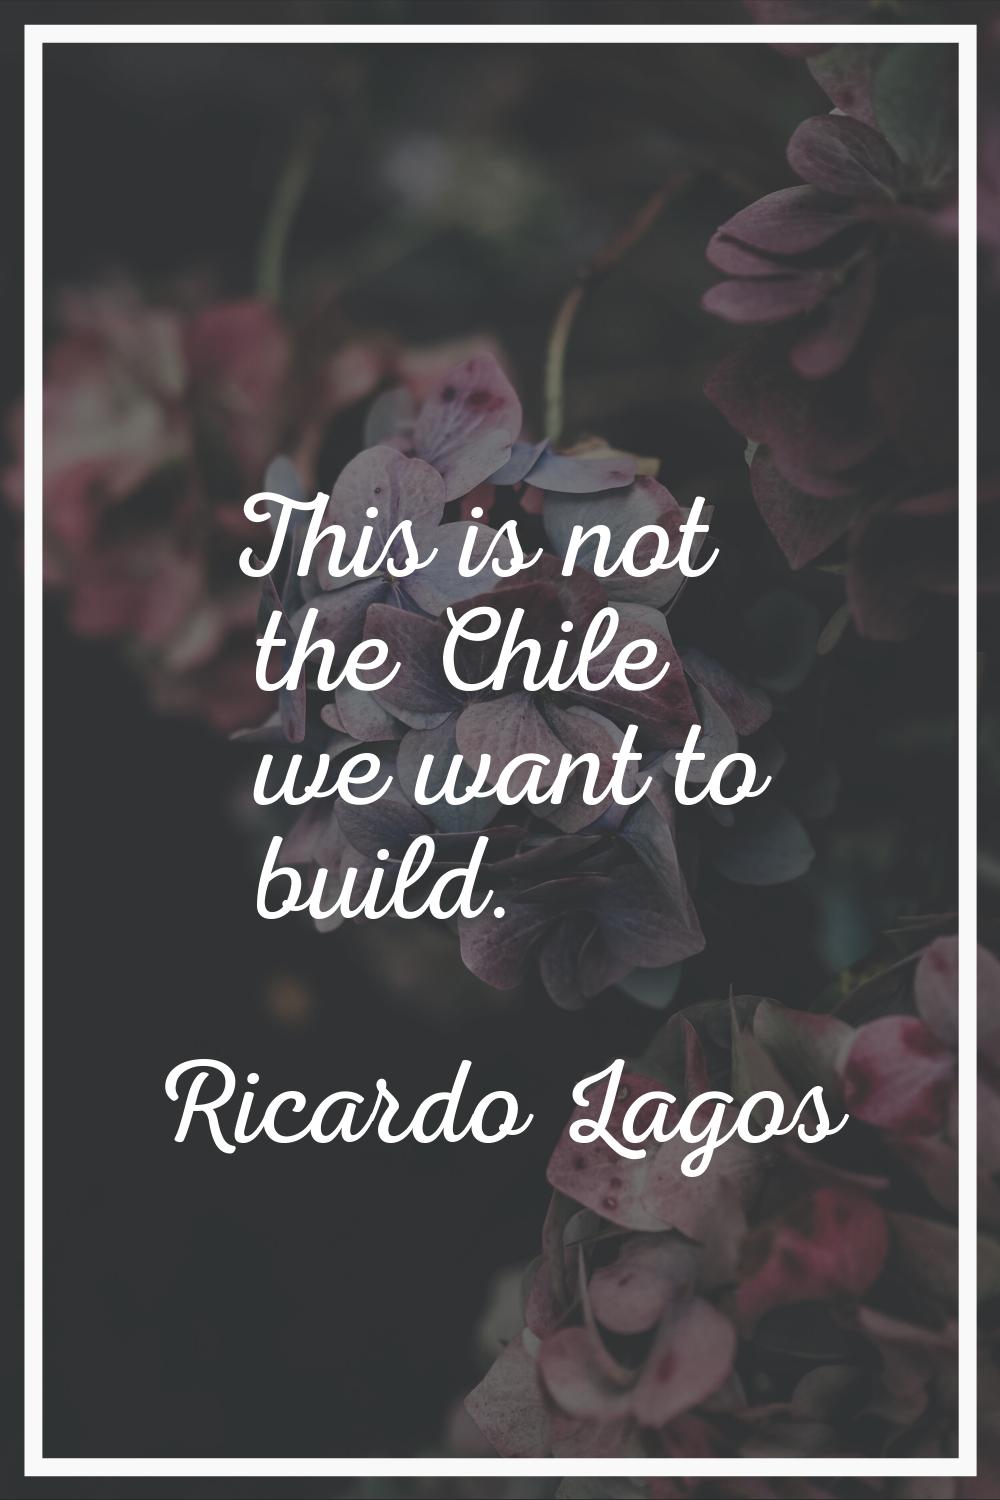 This is not the Chile we want to build.